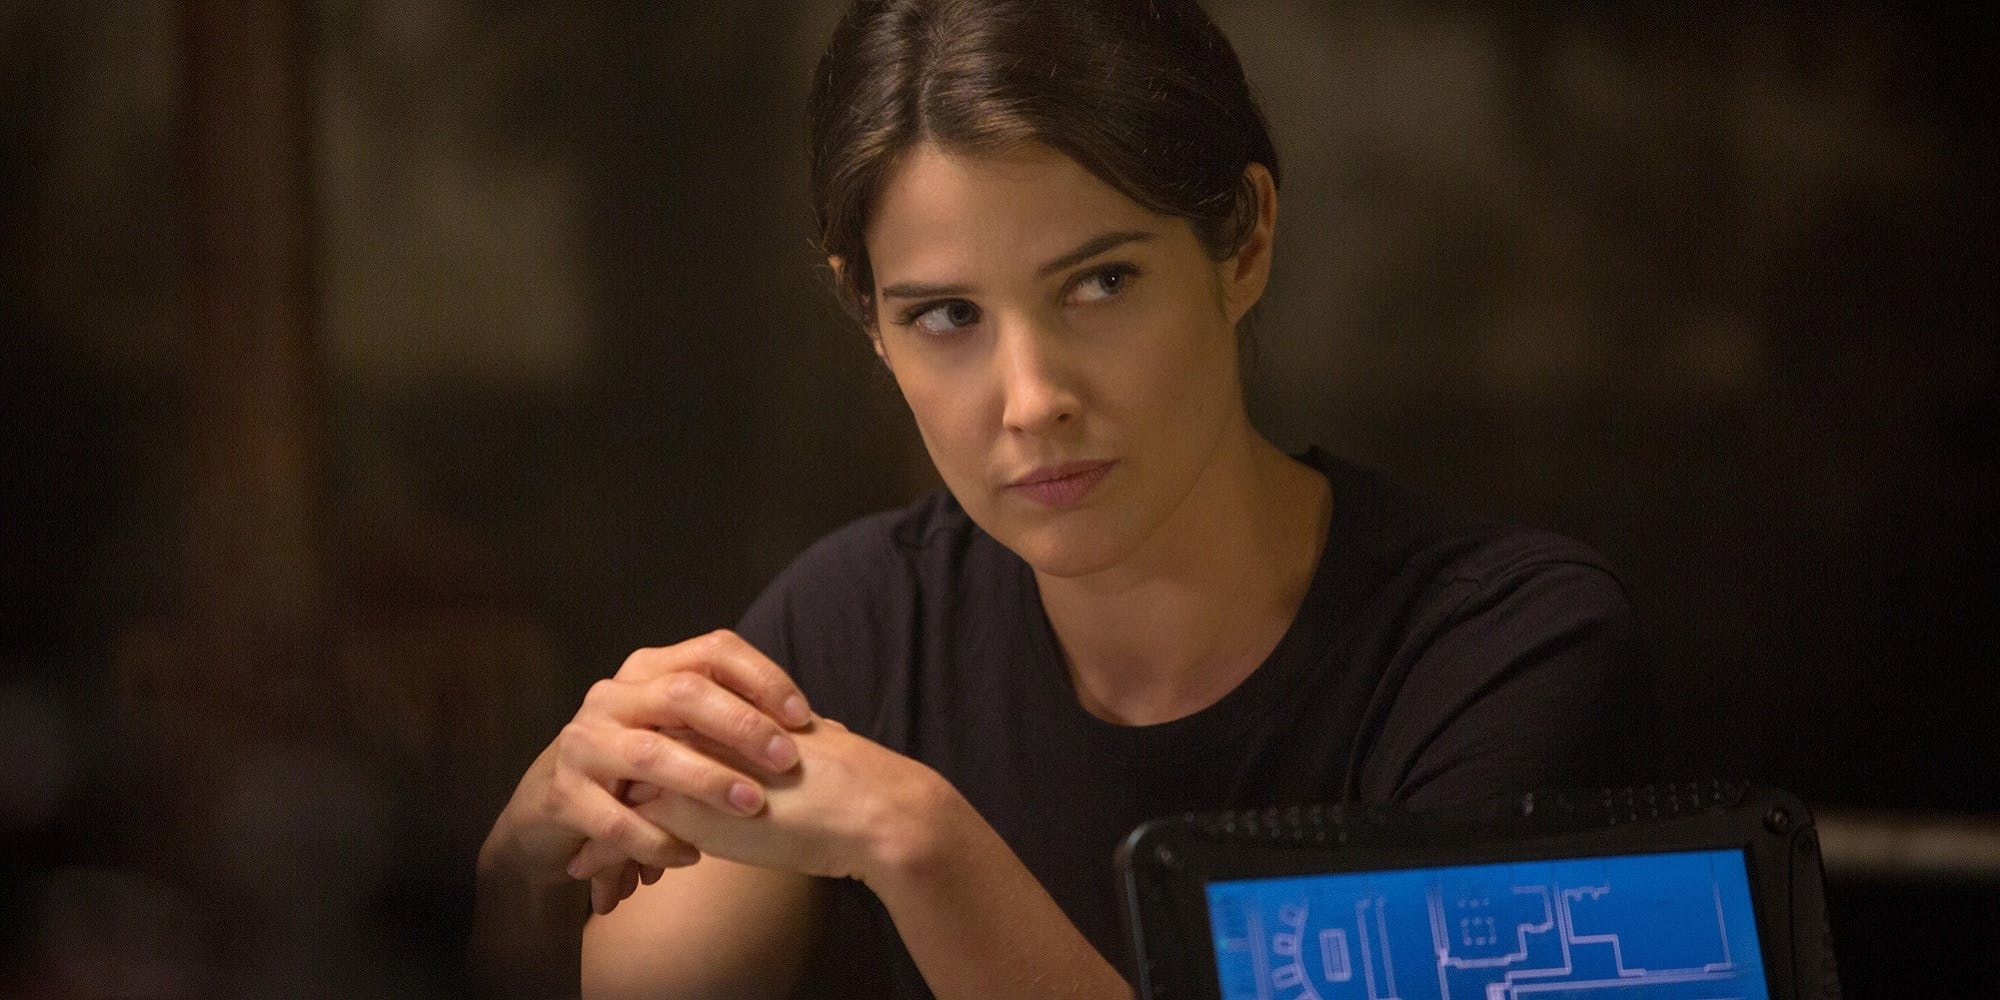 Maria Hill sits and looks to the side